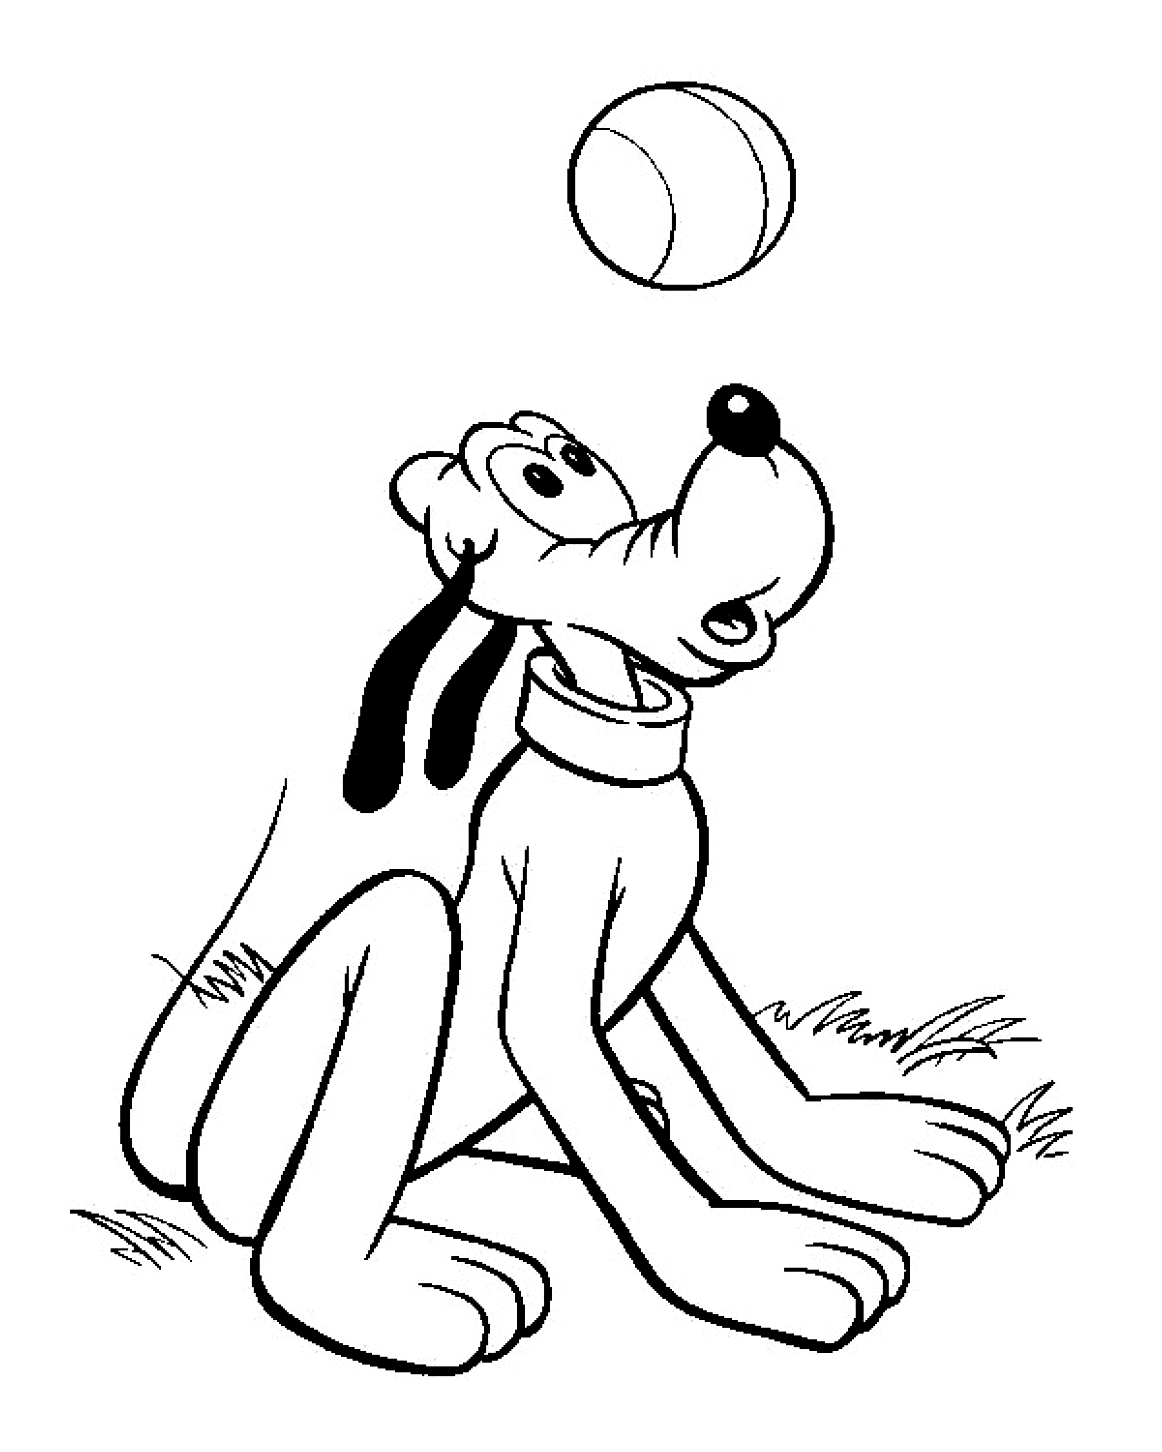 Pluto Coloring Pages Pluto Free To Color For Children Pluto Kids Coloring Pages